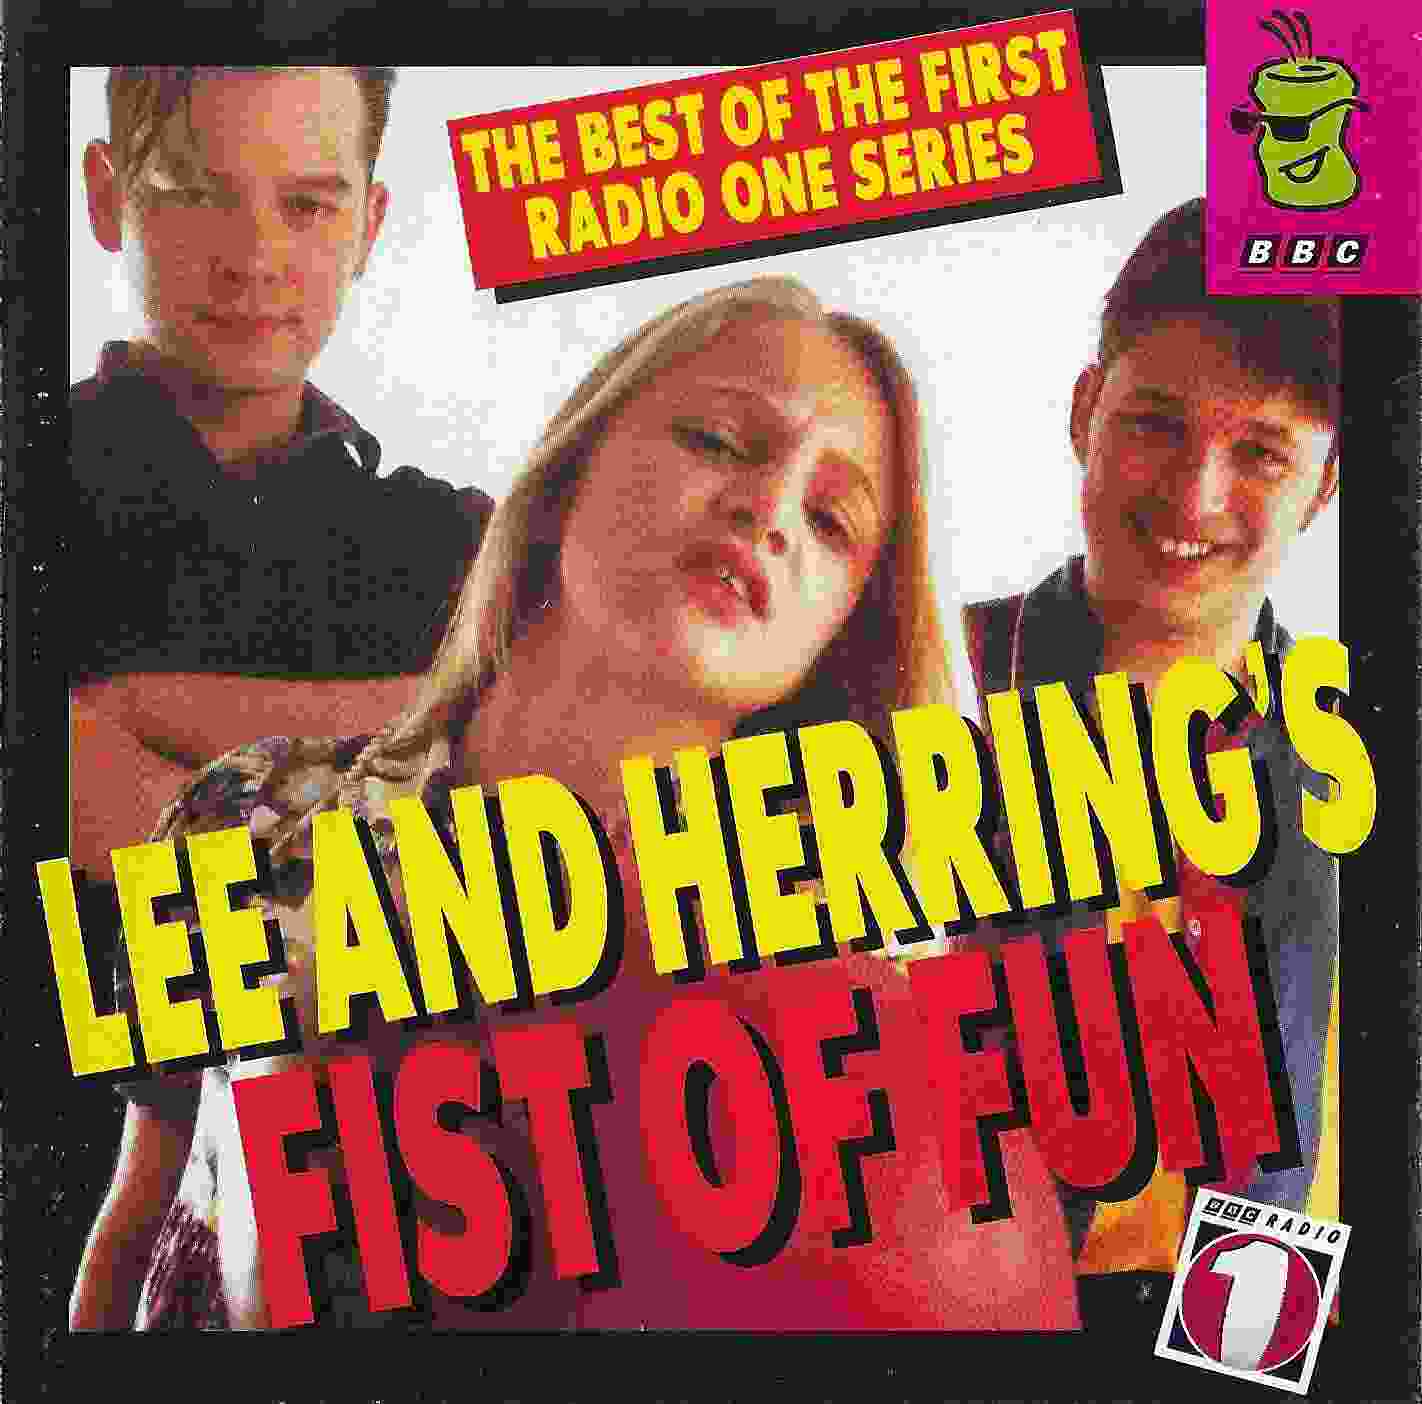 Picture of ZBBC 1787 CD Fist of fun by artist Lee / Herring from the BBC cds - Records and Tapes library